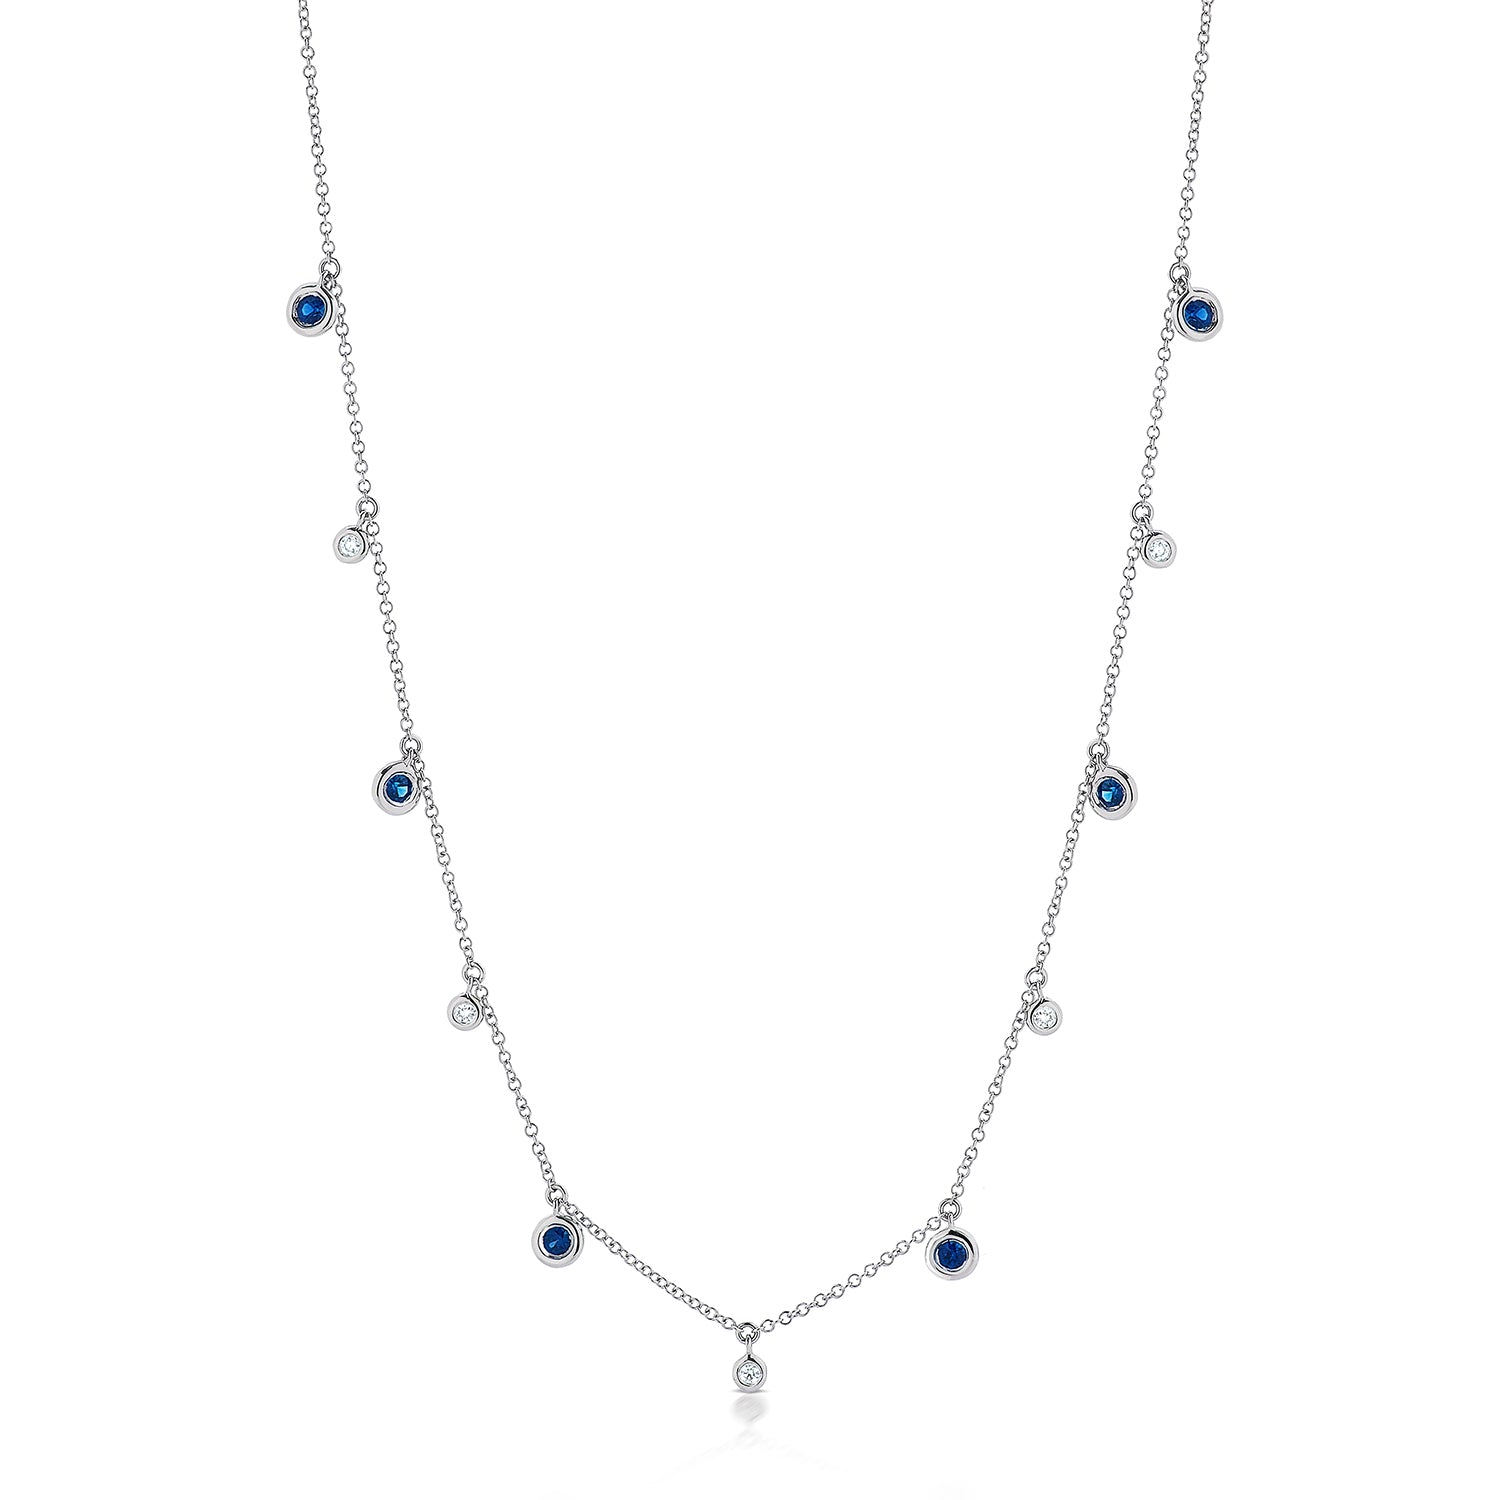 
  
  14k White Gold Dangling Bezel Diamond and Sapphire Necklace
  
